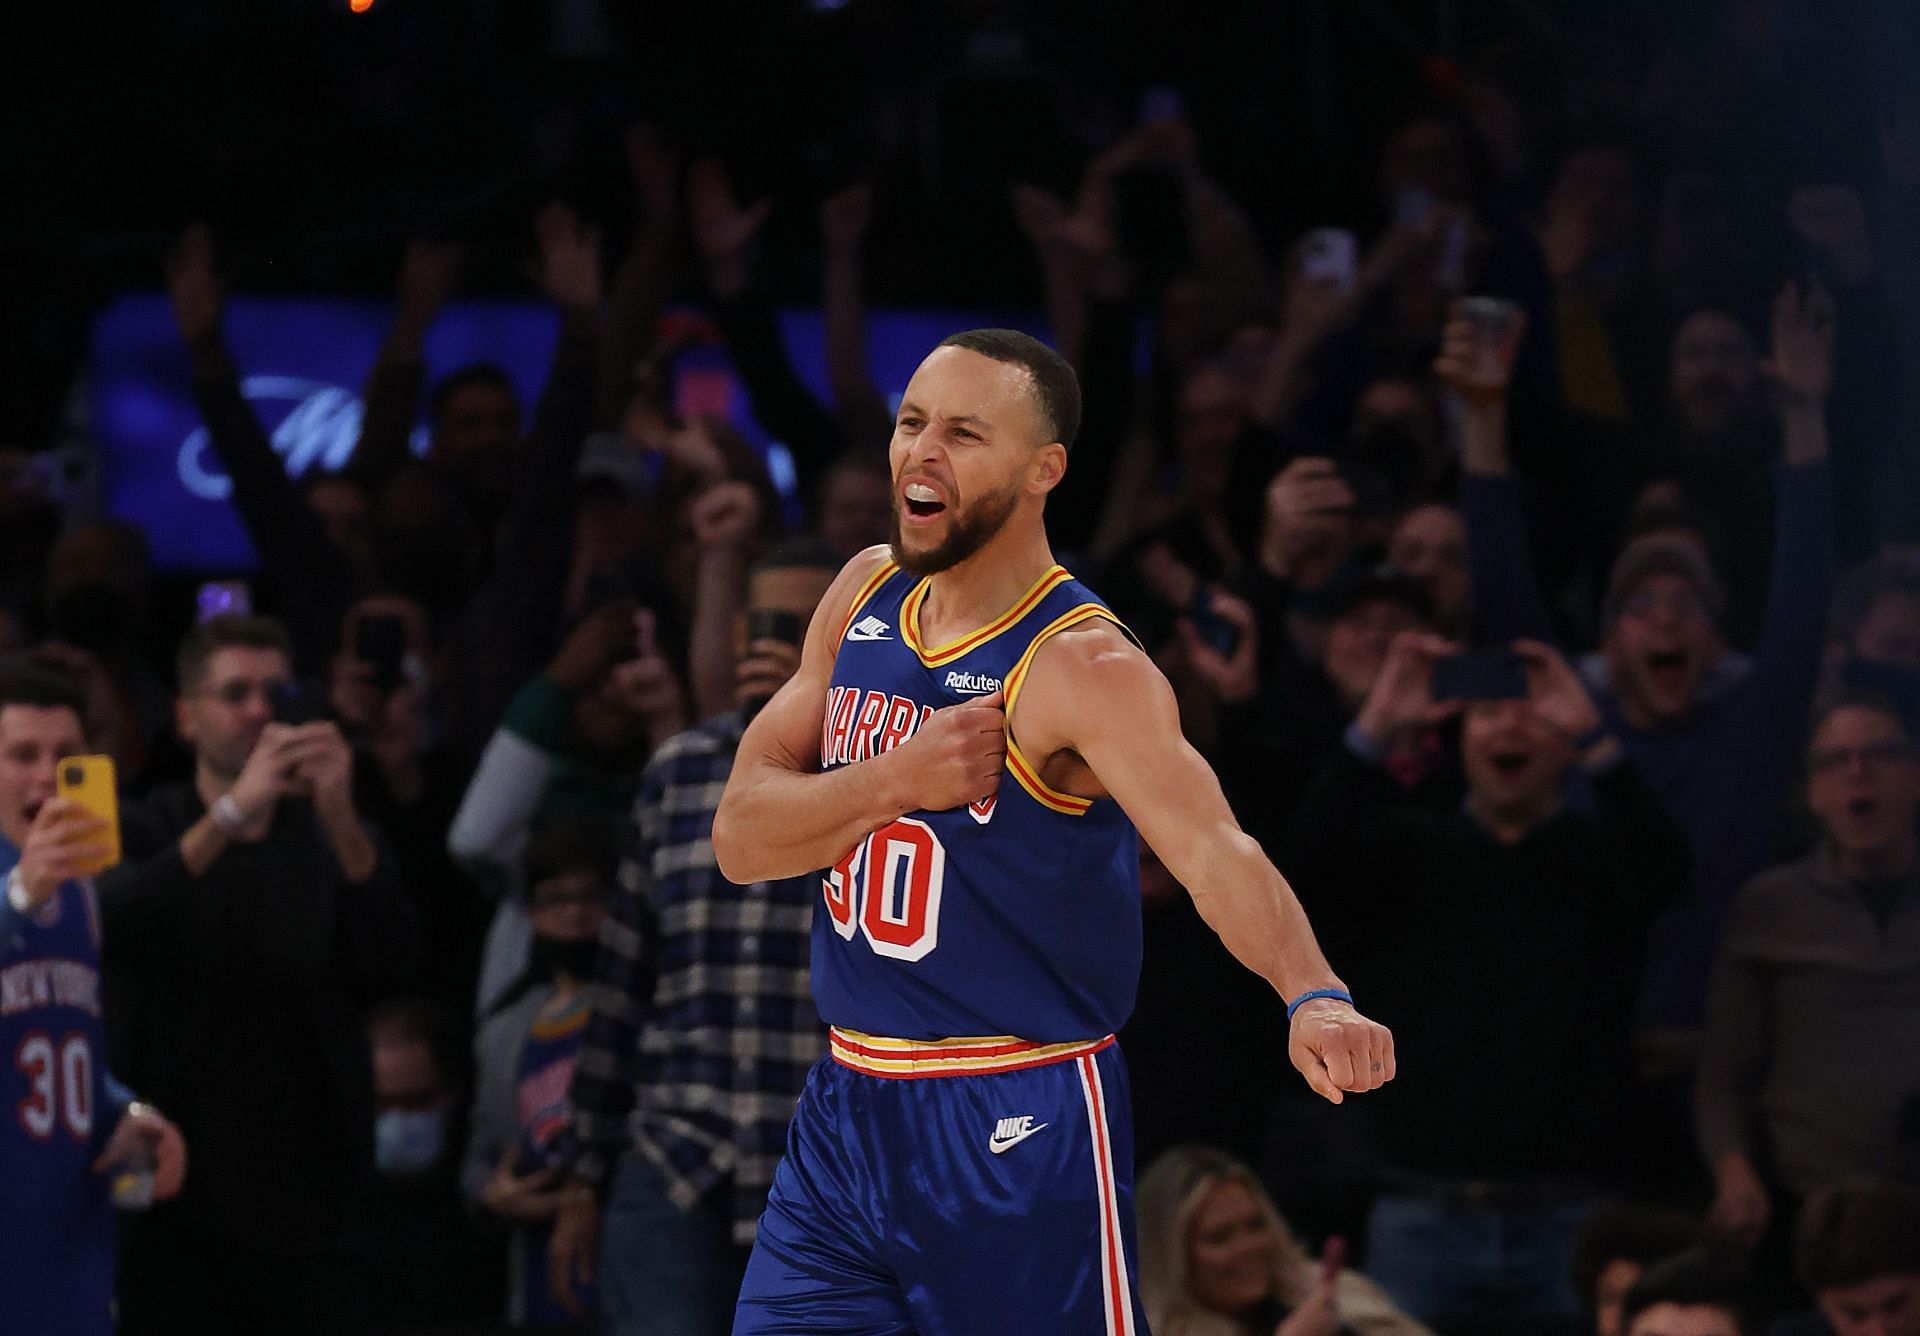 Steph Curry playing at MSG against the New York Knicks